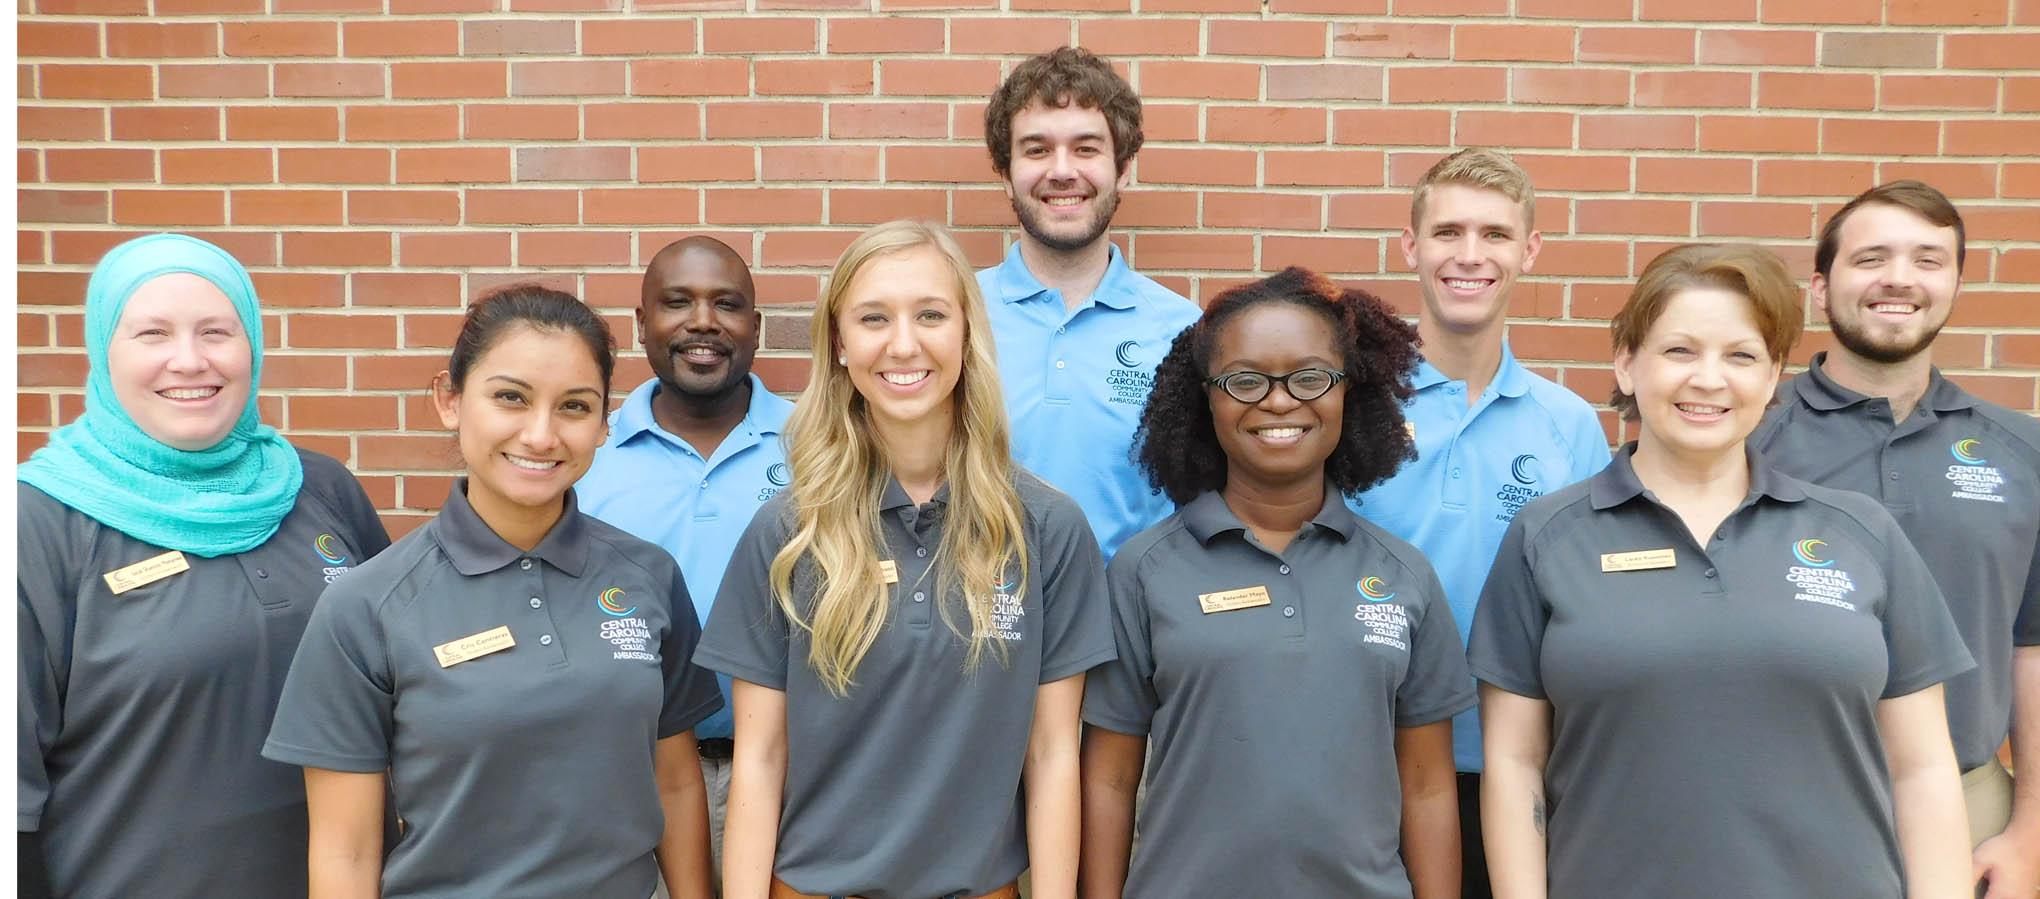 Click to enlarge,  The Central Carolina Community College Ambassadors for 2015-16 are pictured, left to right: front row, Sarah Shannon Mohamed, Cris Contreras, Landis Johnson, Rolander Mayo, and Lacey Kuenzler; back row, Chriss Harvin, Aaron Kovasckitz, Christian George, and David Pope III. Not pictured is Megan Blair. 